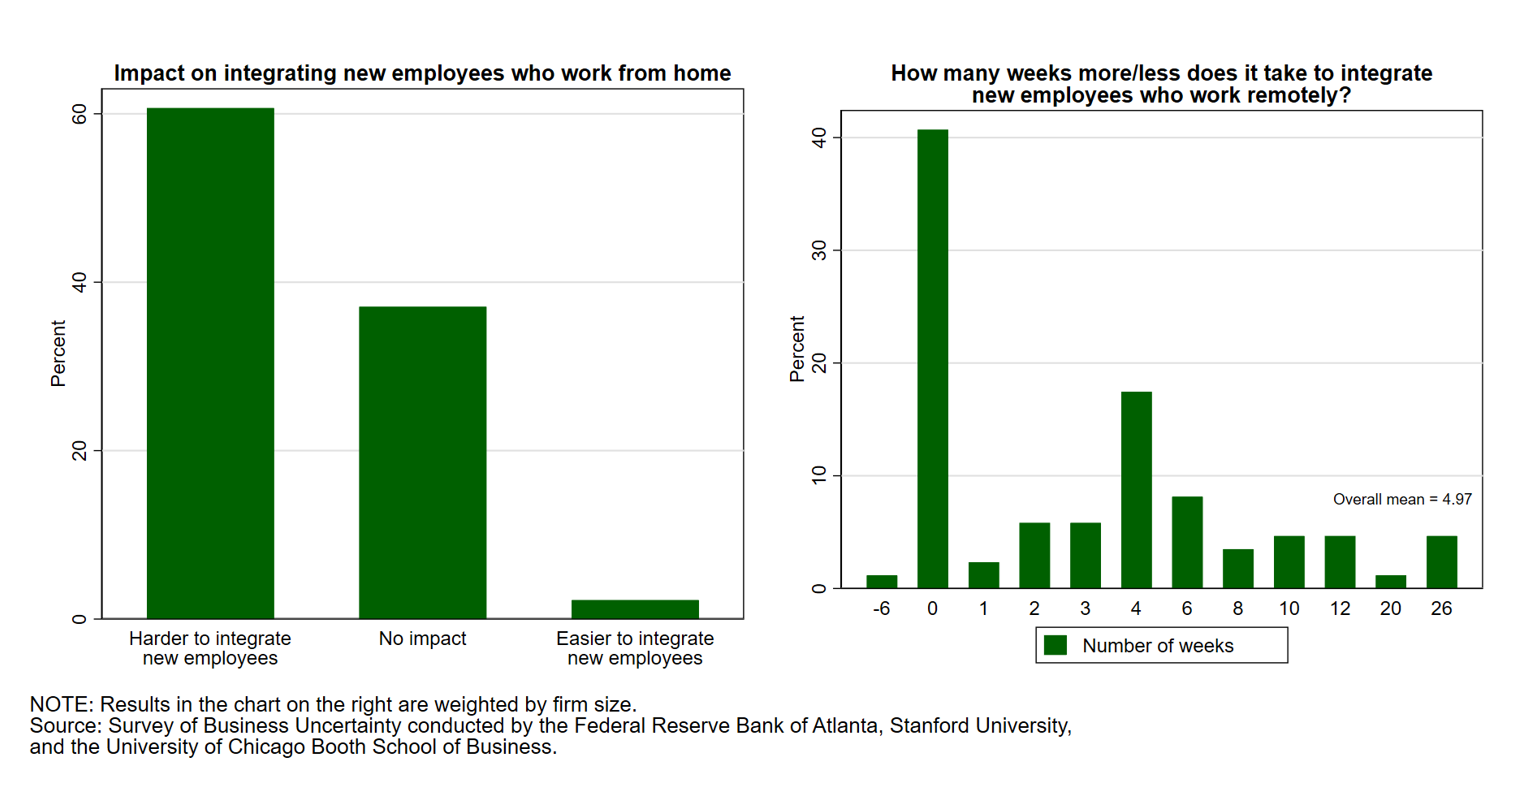 Chart 01 of 03: Impact on integrating new employees who work from home